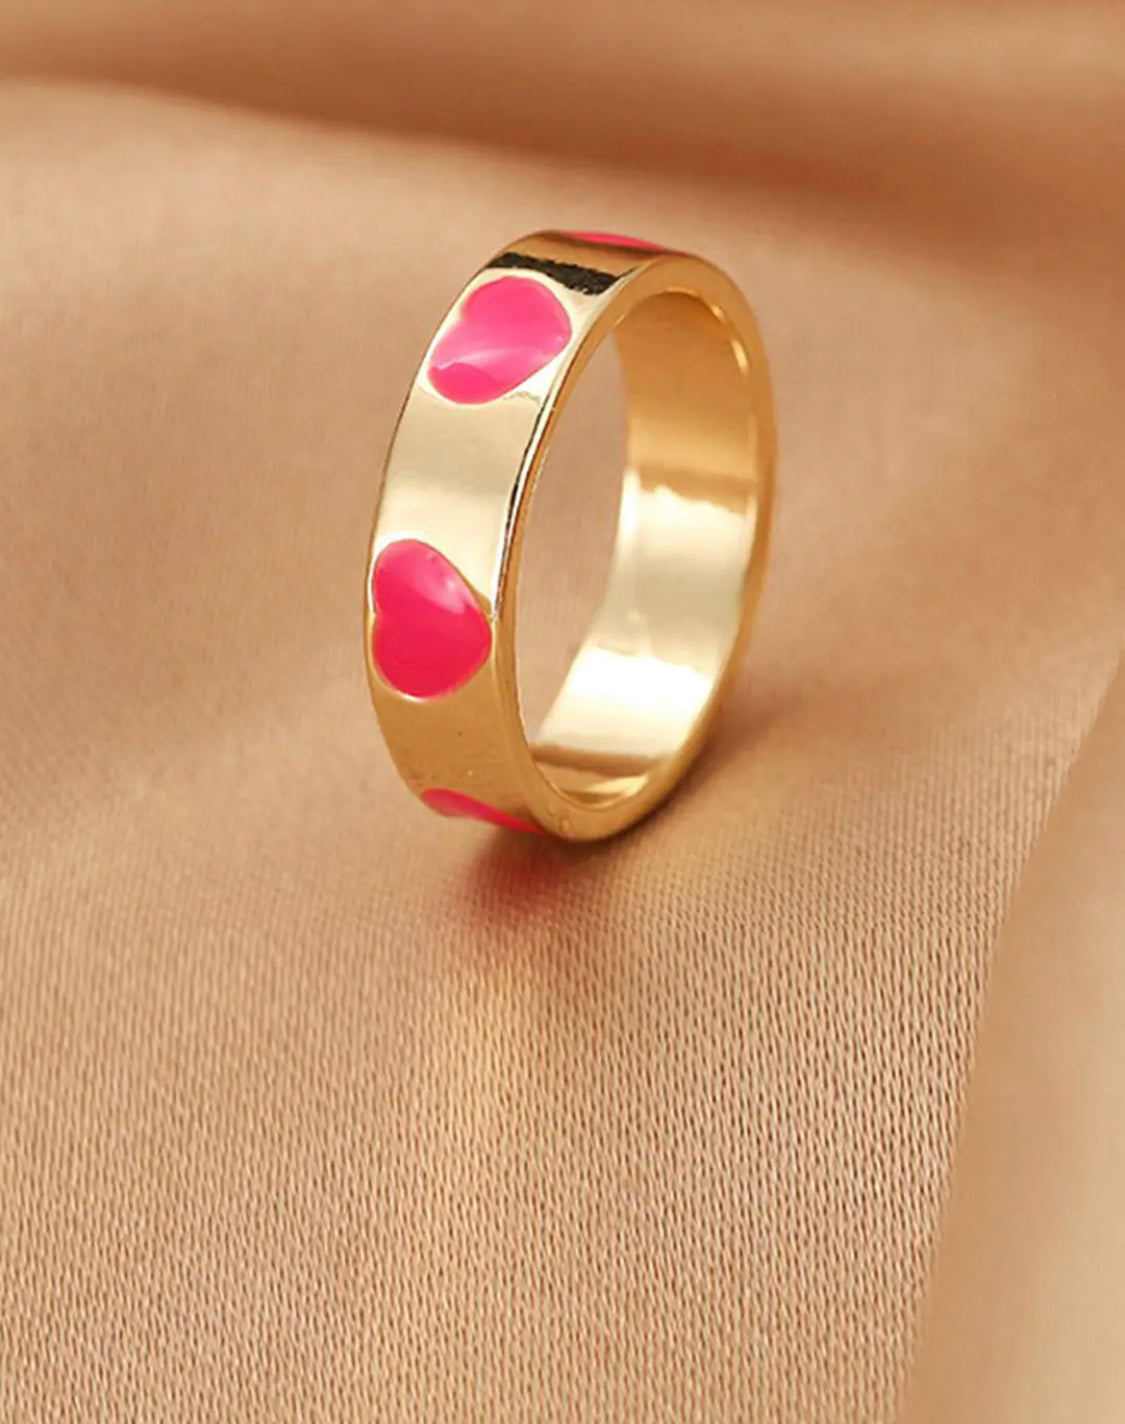 Gold Plated Pink Enamelled - Set Of 4 Rings